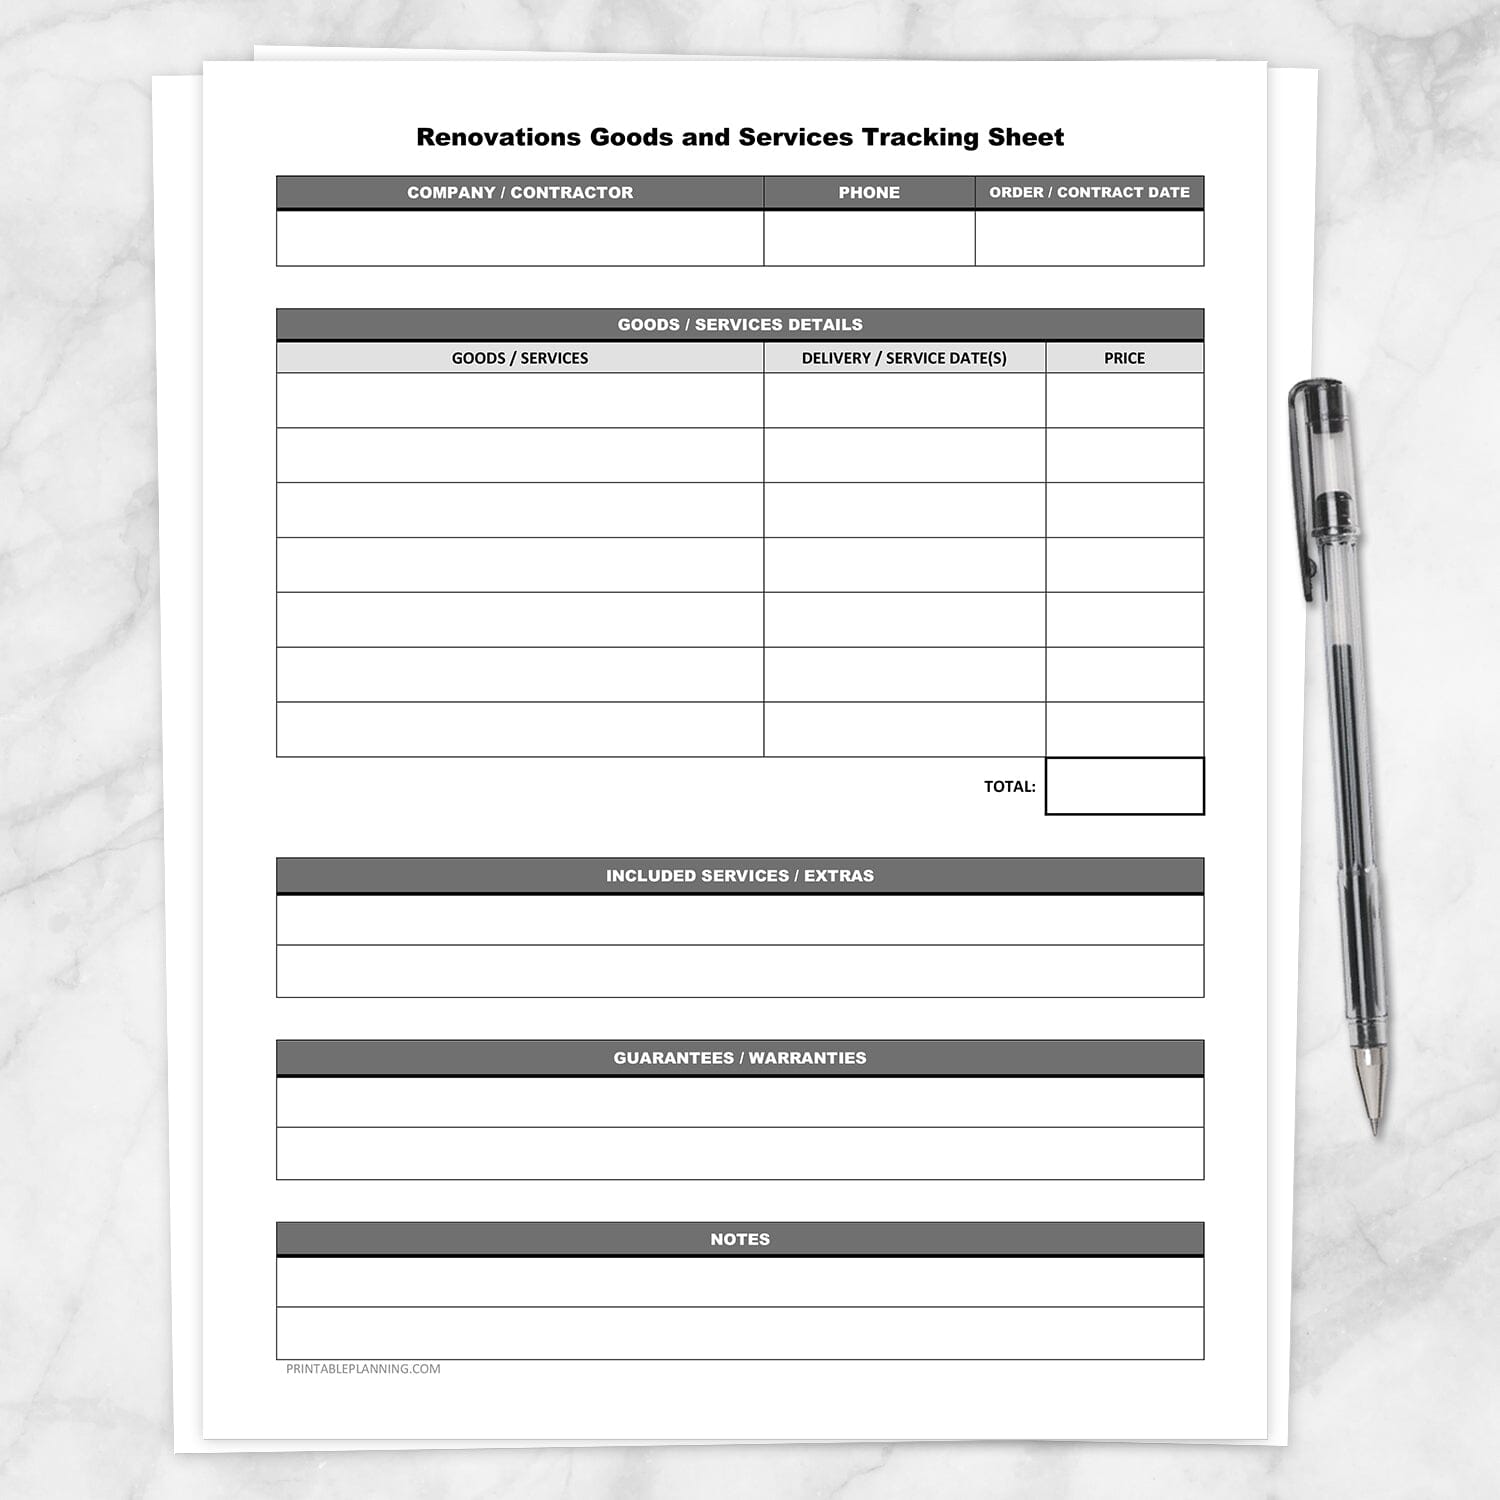 Printable Renovations Goods and Services Tracking Sheet at Printable Planning.